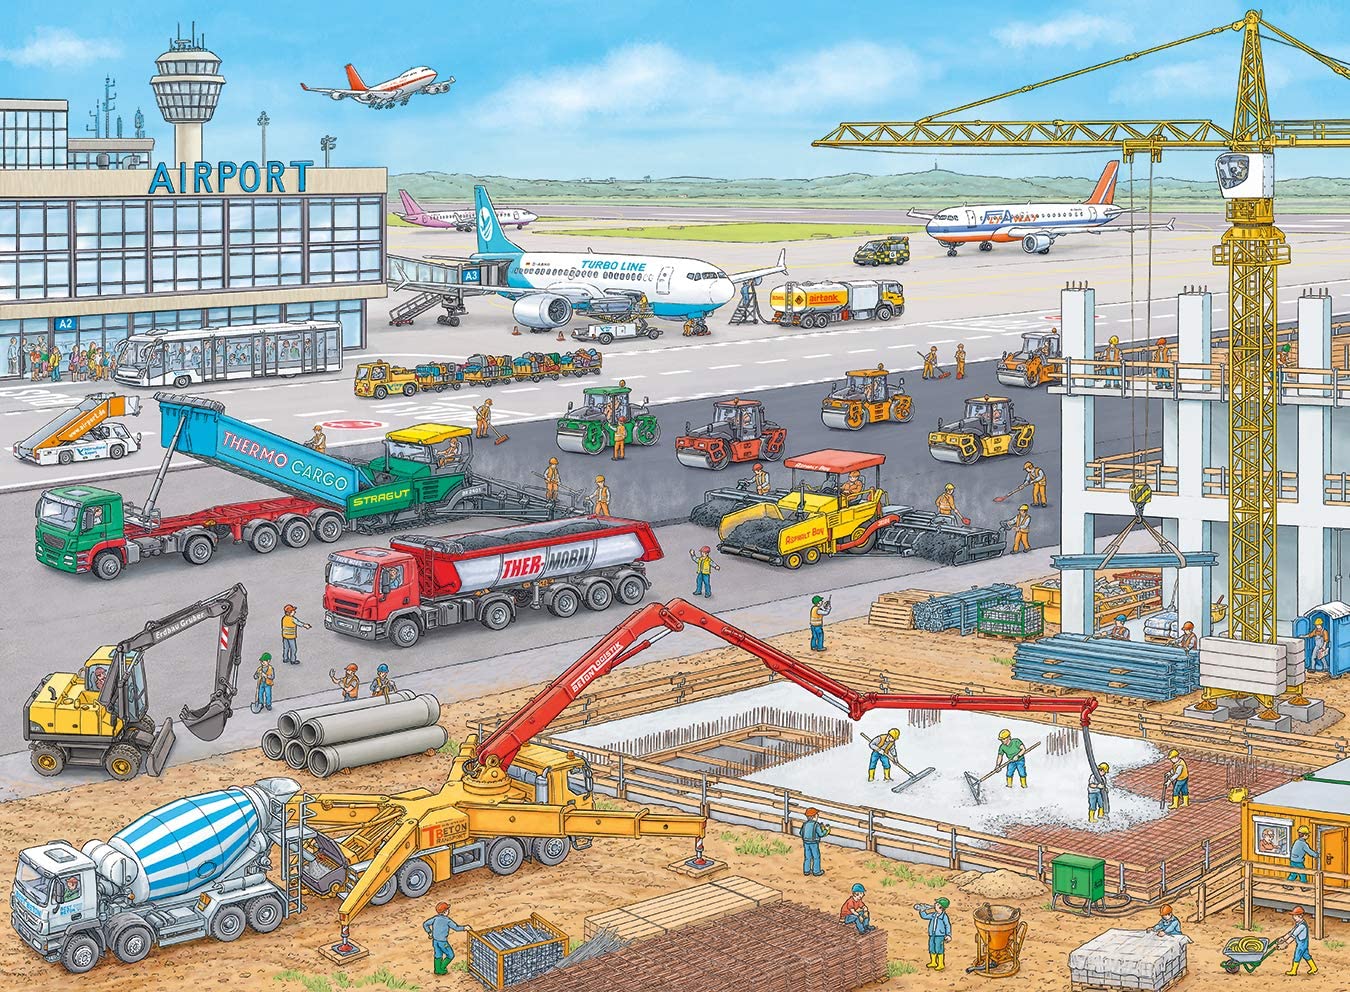 Construction at The Airport